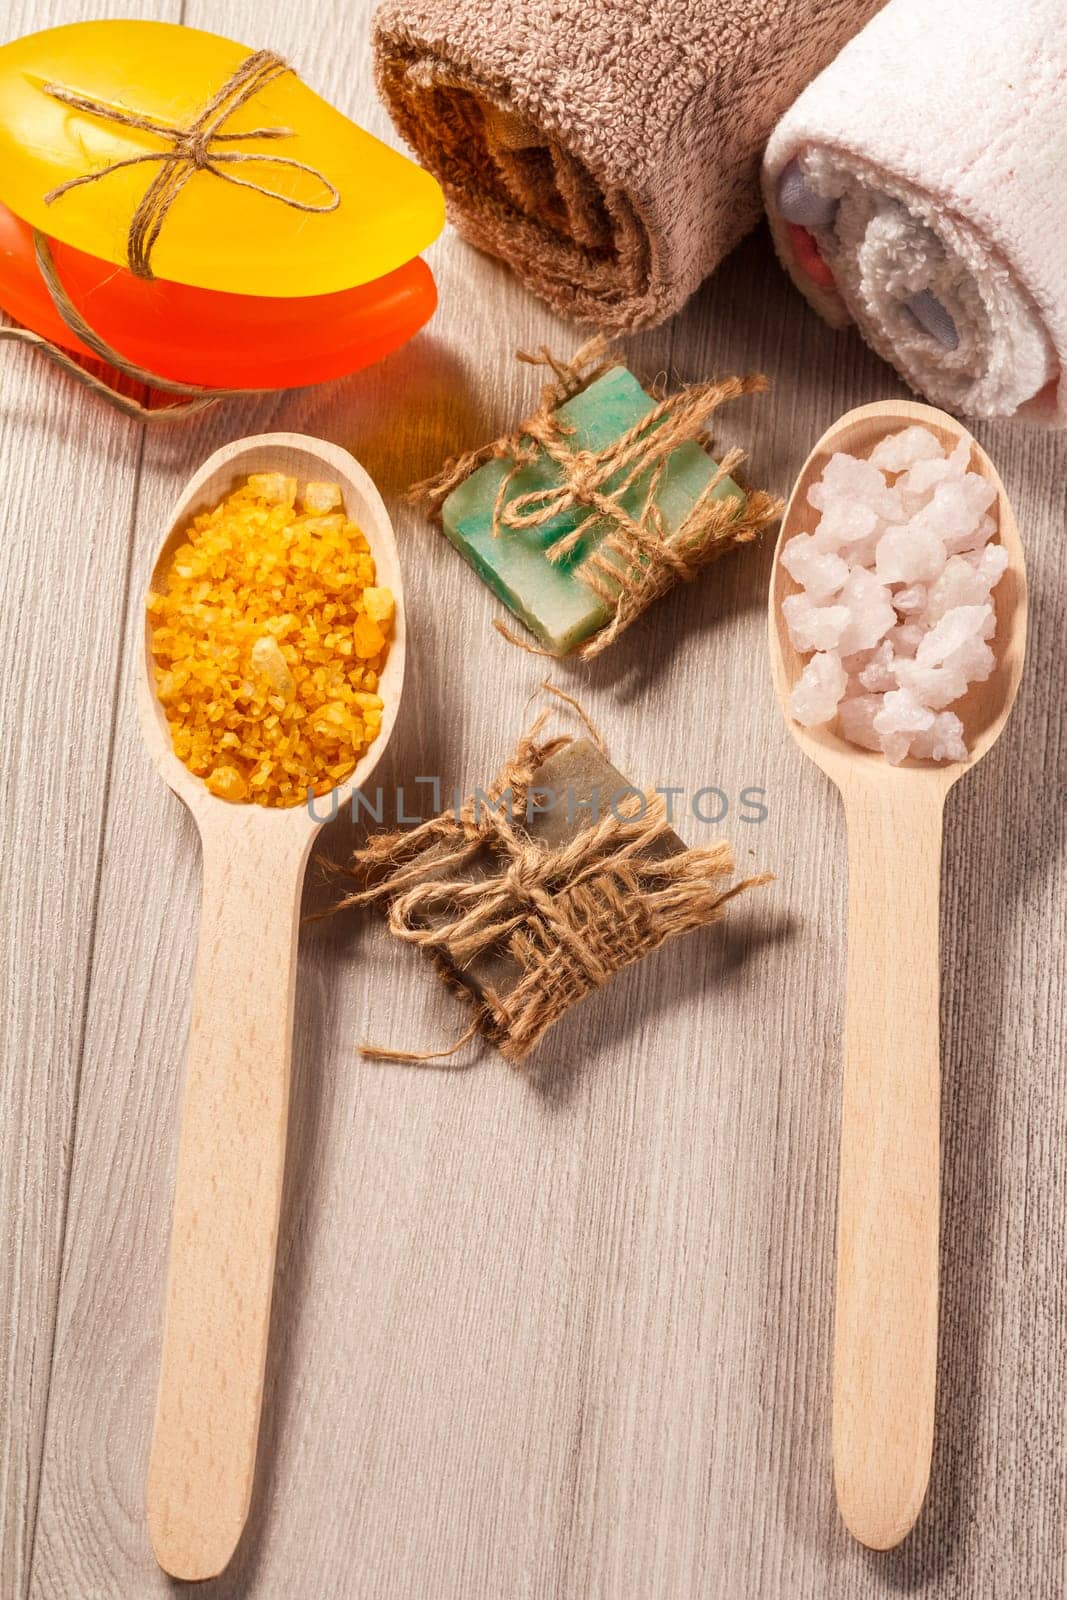 Wooden spoons with yellow and white sea salt and handmade soap for bathroom procedures with towels on the background. Spa products and accessories